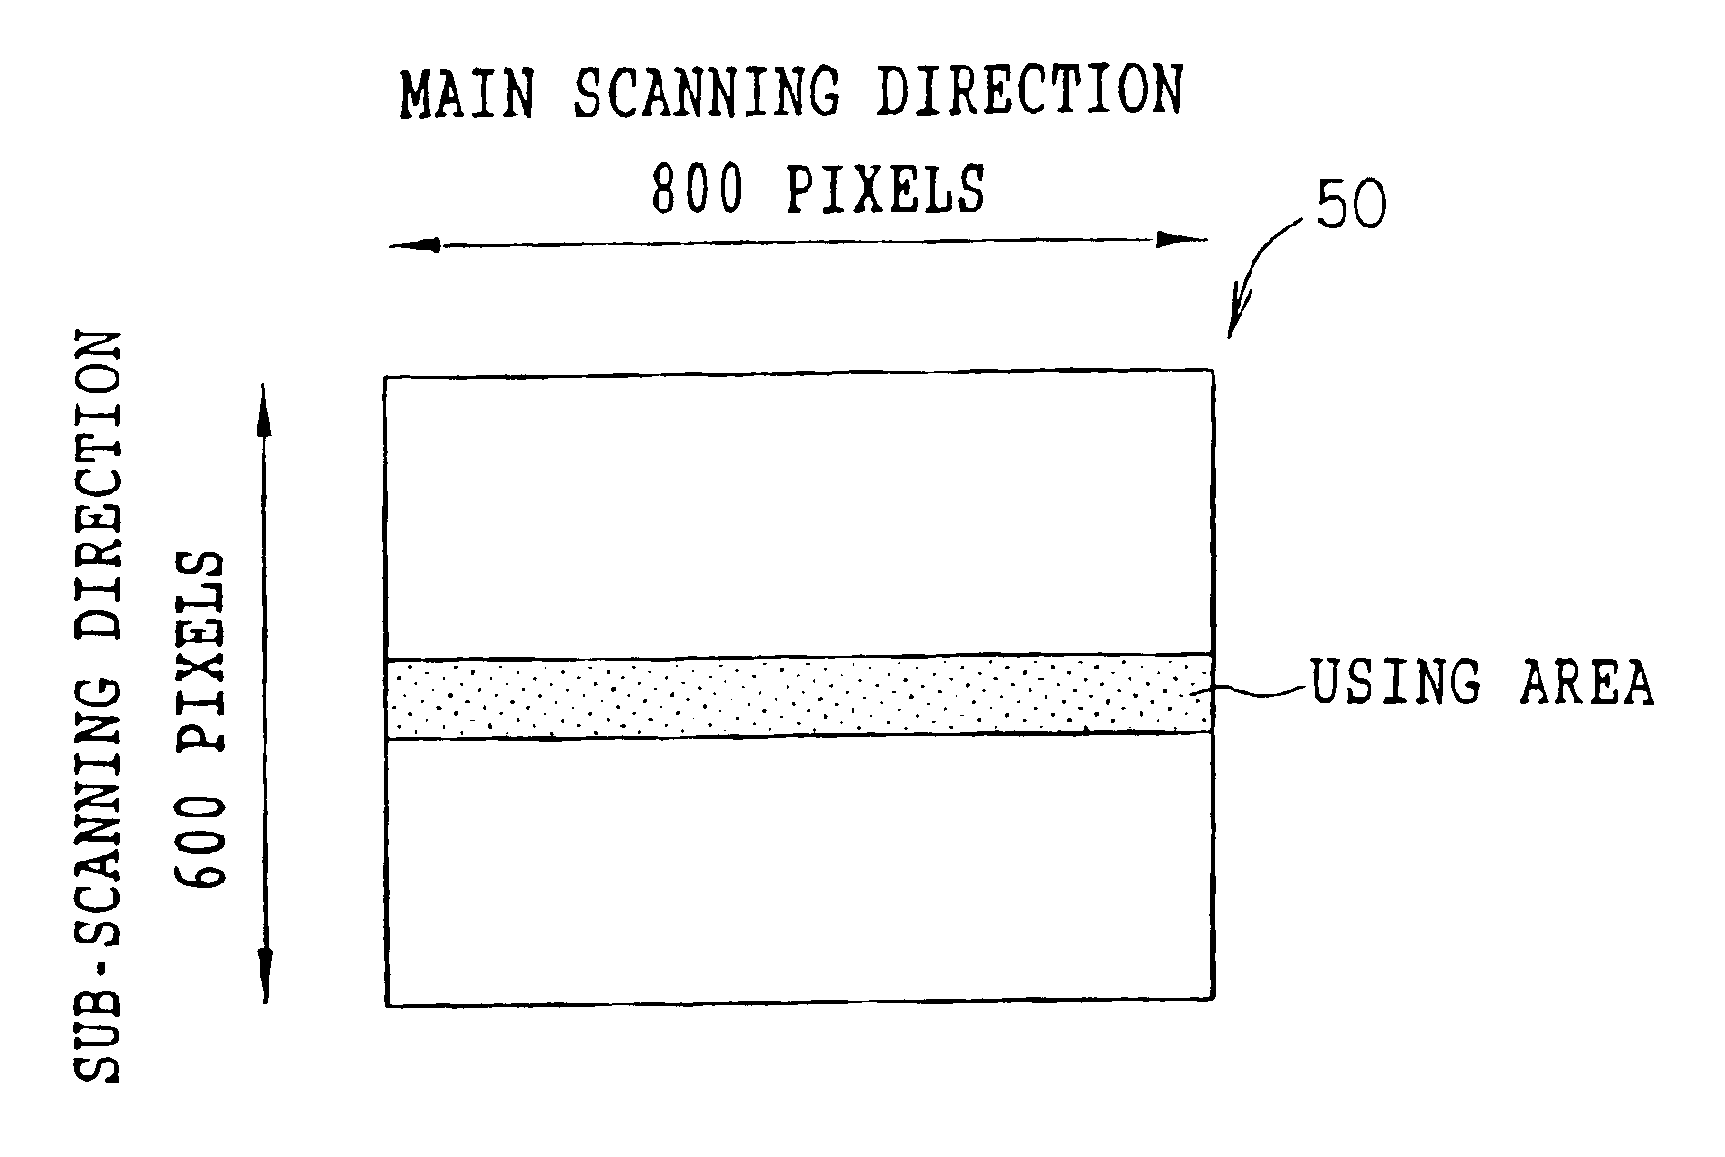 Exposure head, exposure apparatus, and application thereof